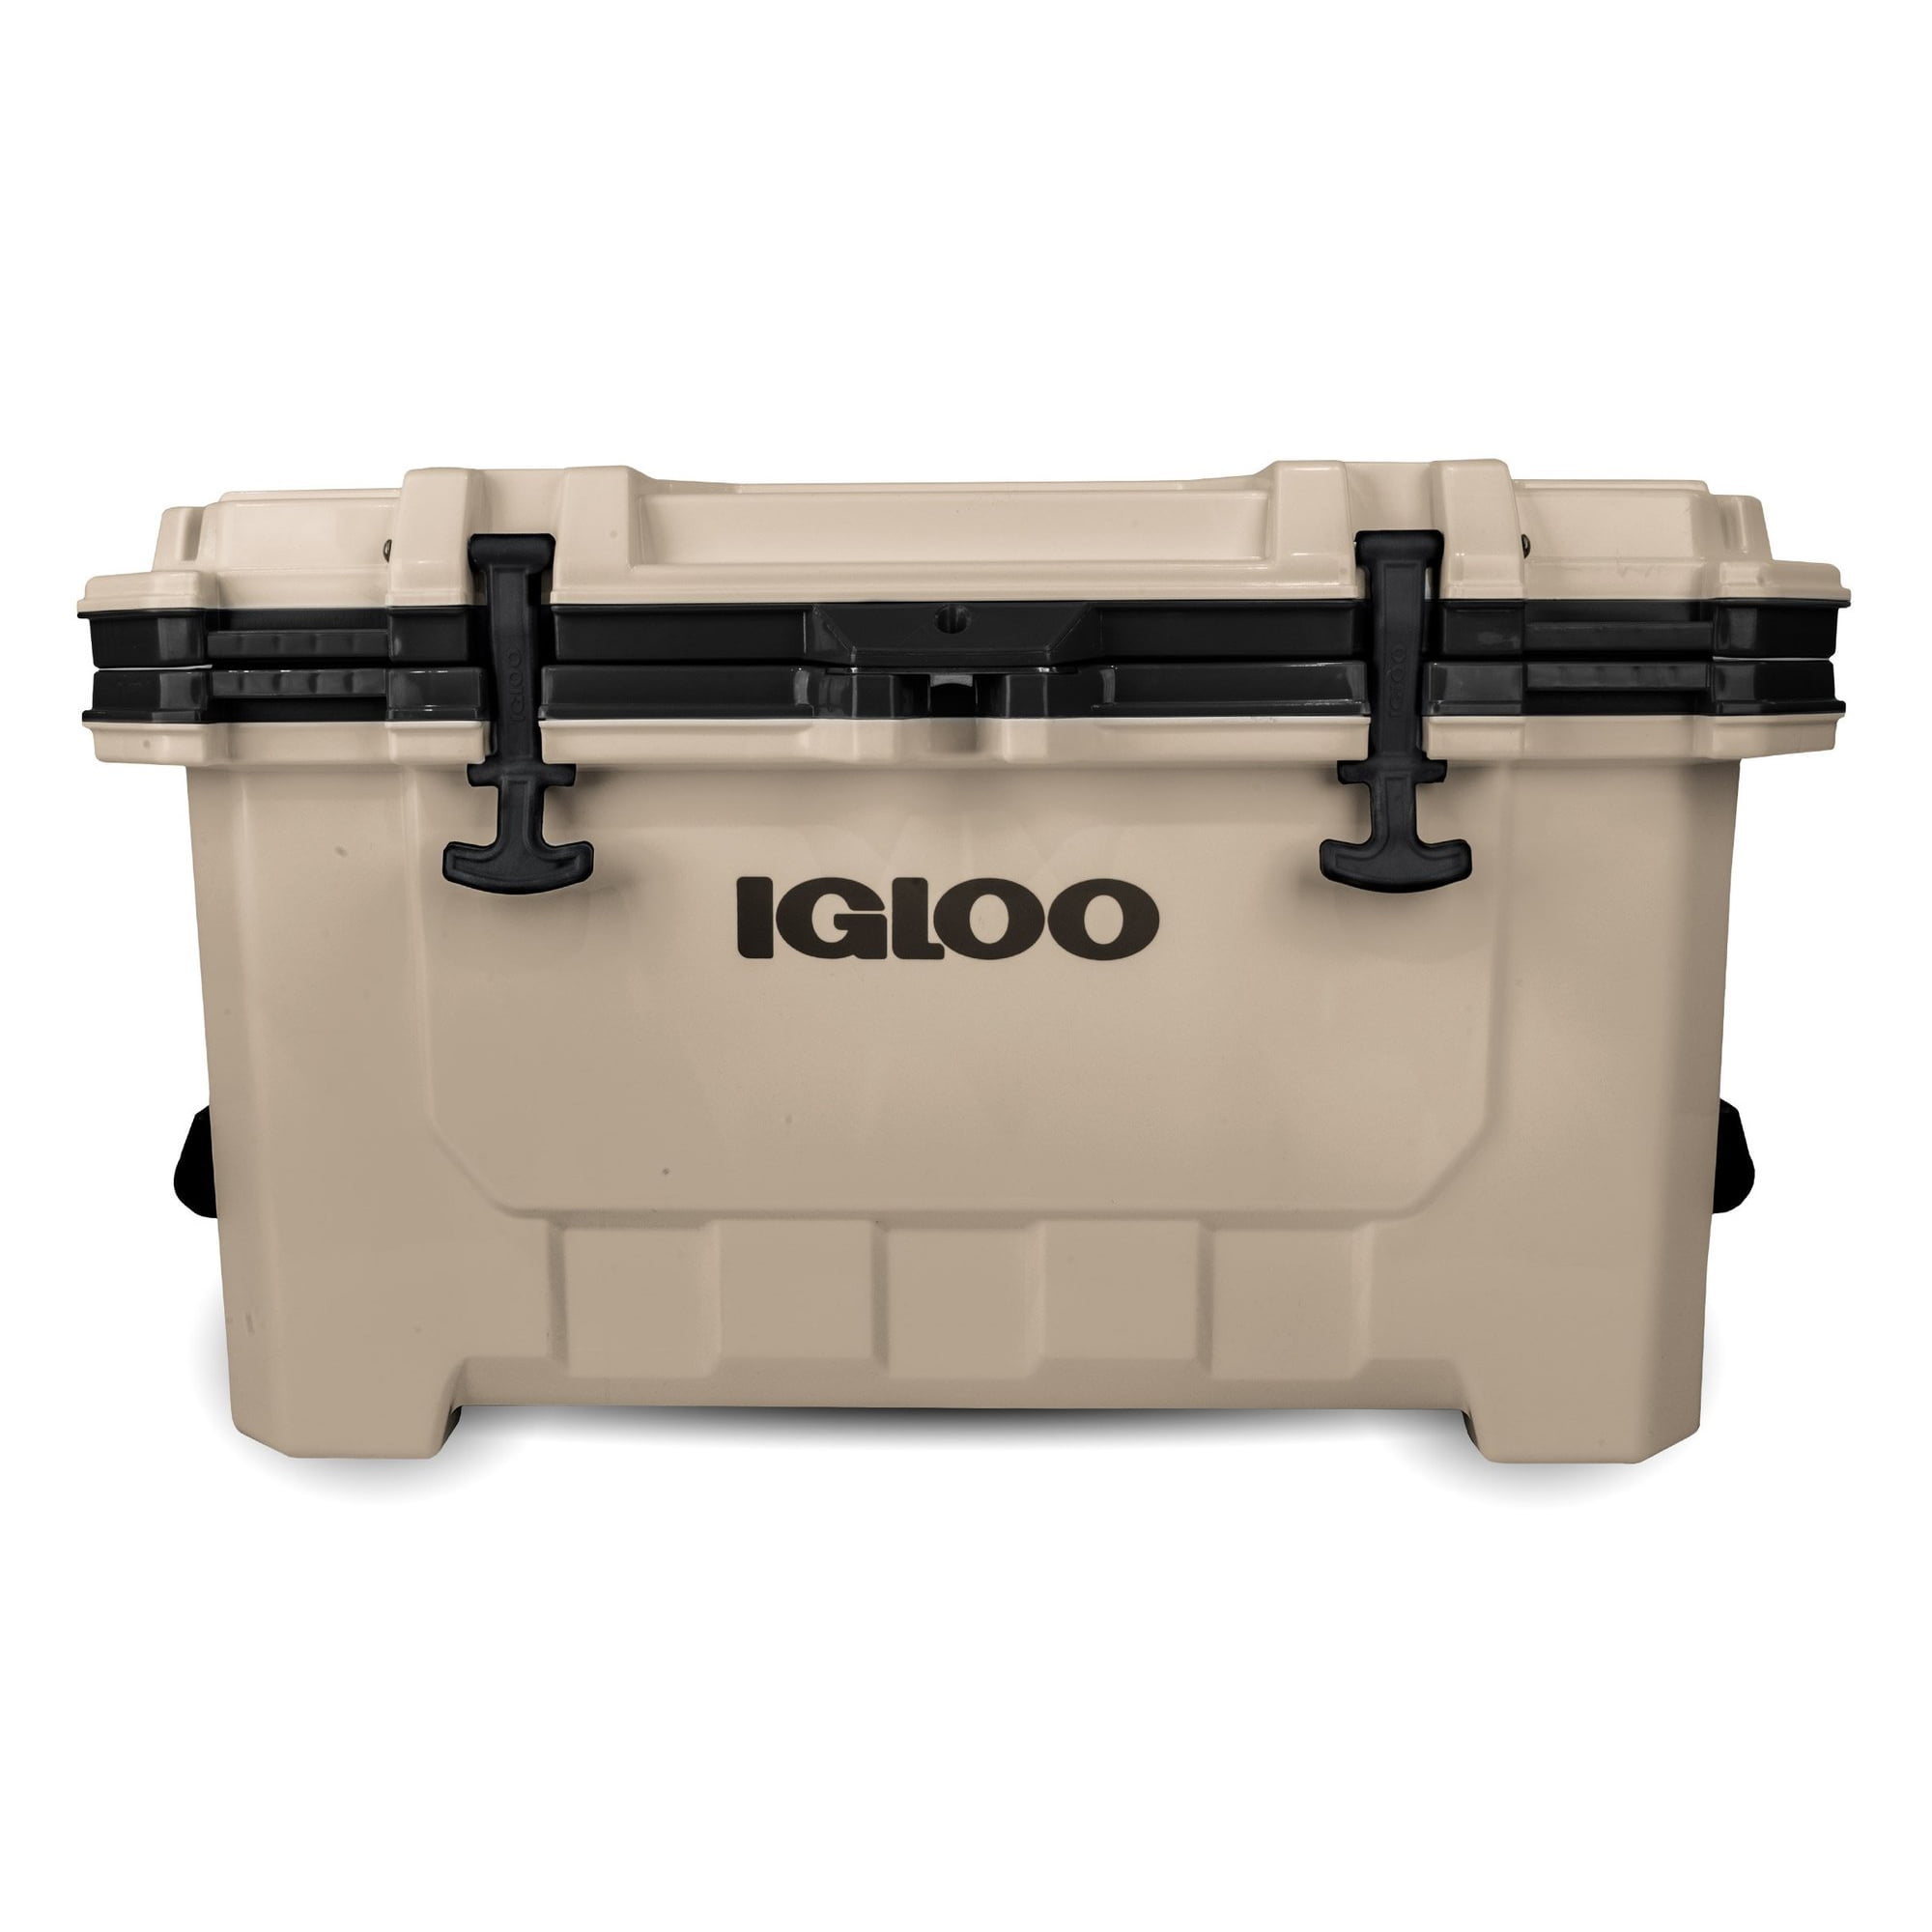 Igloo 00049858 IMX 70 Qt. Heavy Duty Injected Molded Construction Cooler,  Tan